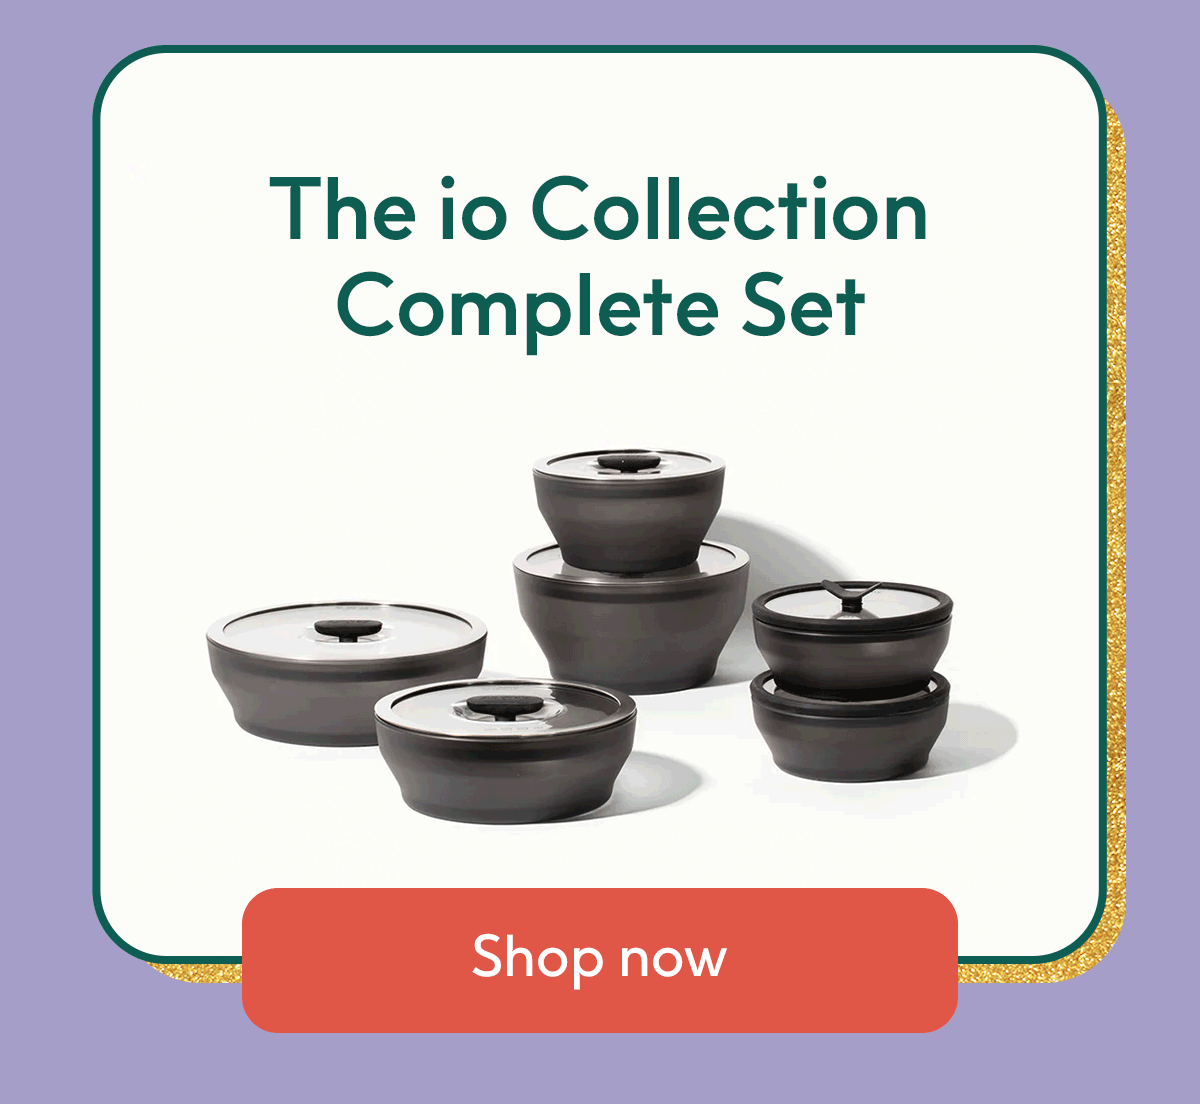 The io Collection Complete Set